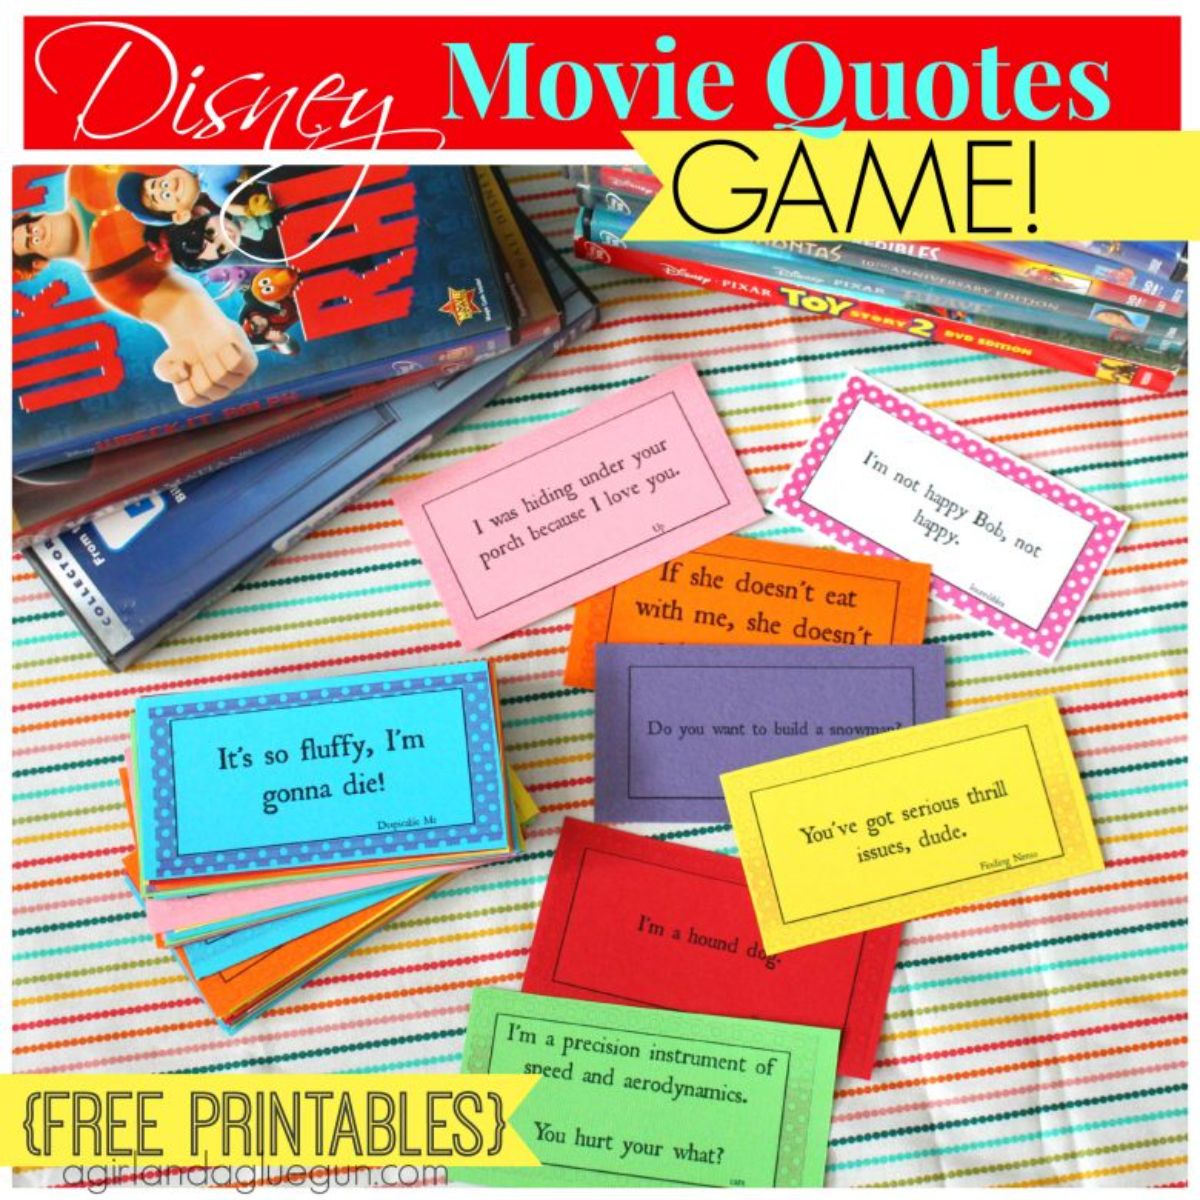 the text reads "Disney movie quotes game (free printables)" The image is a of a collection of cards with quotes from disney movies on them. Disney DVDs can be seen above them